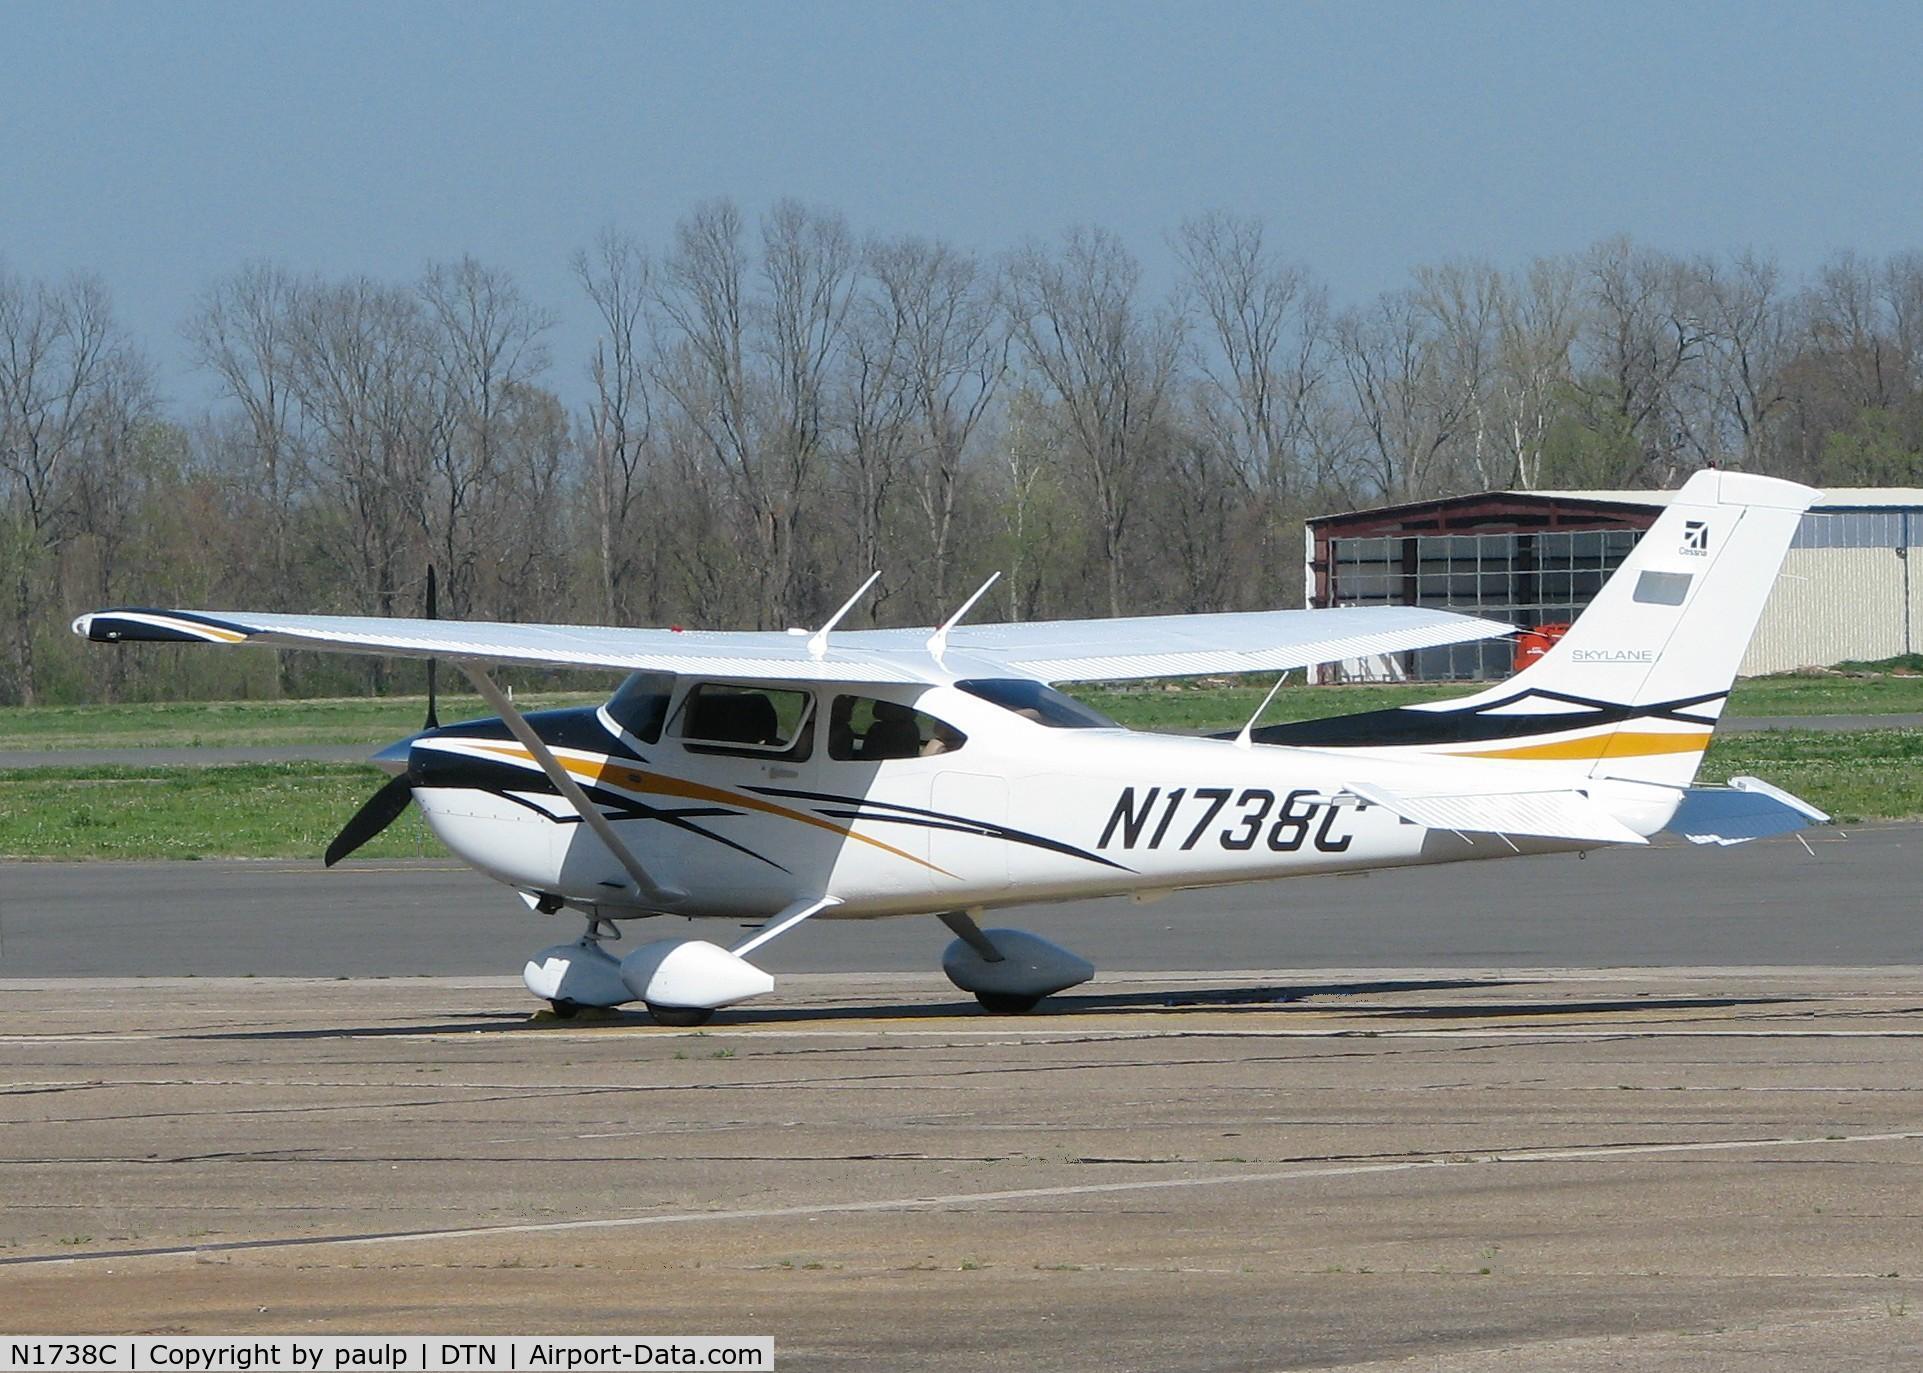 N1738C, 2007 Cessna 182T Skylane C/N 18282040, Parked at the Shreveport Downtown airport.